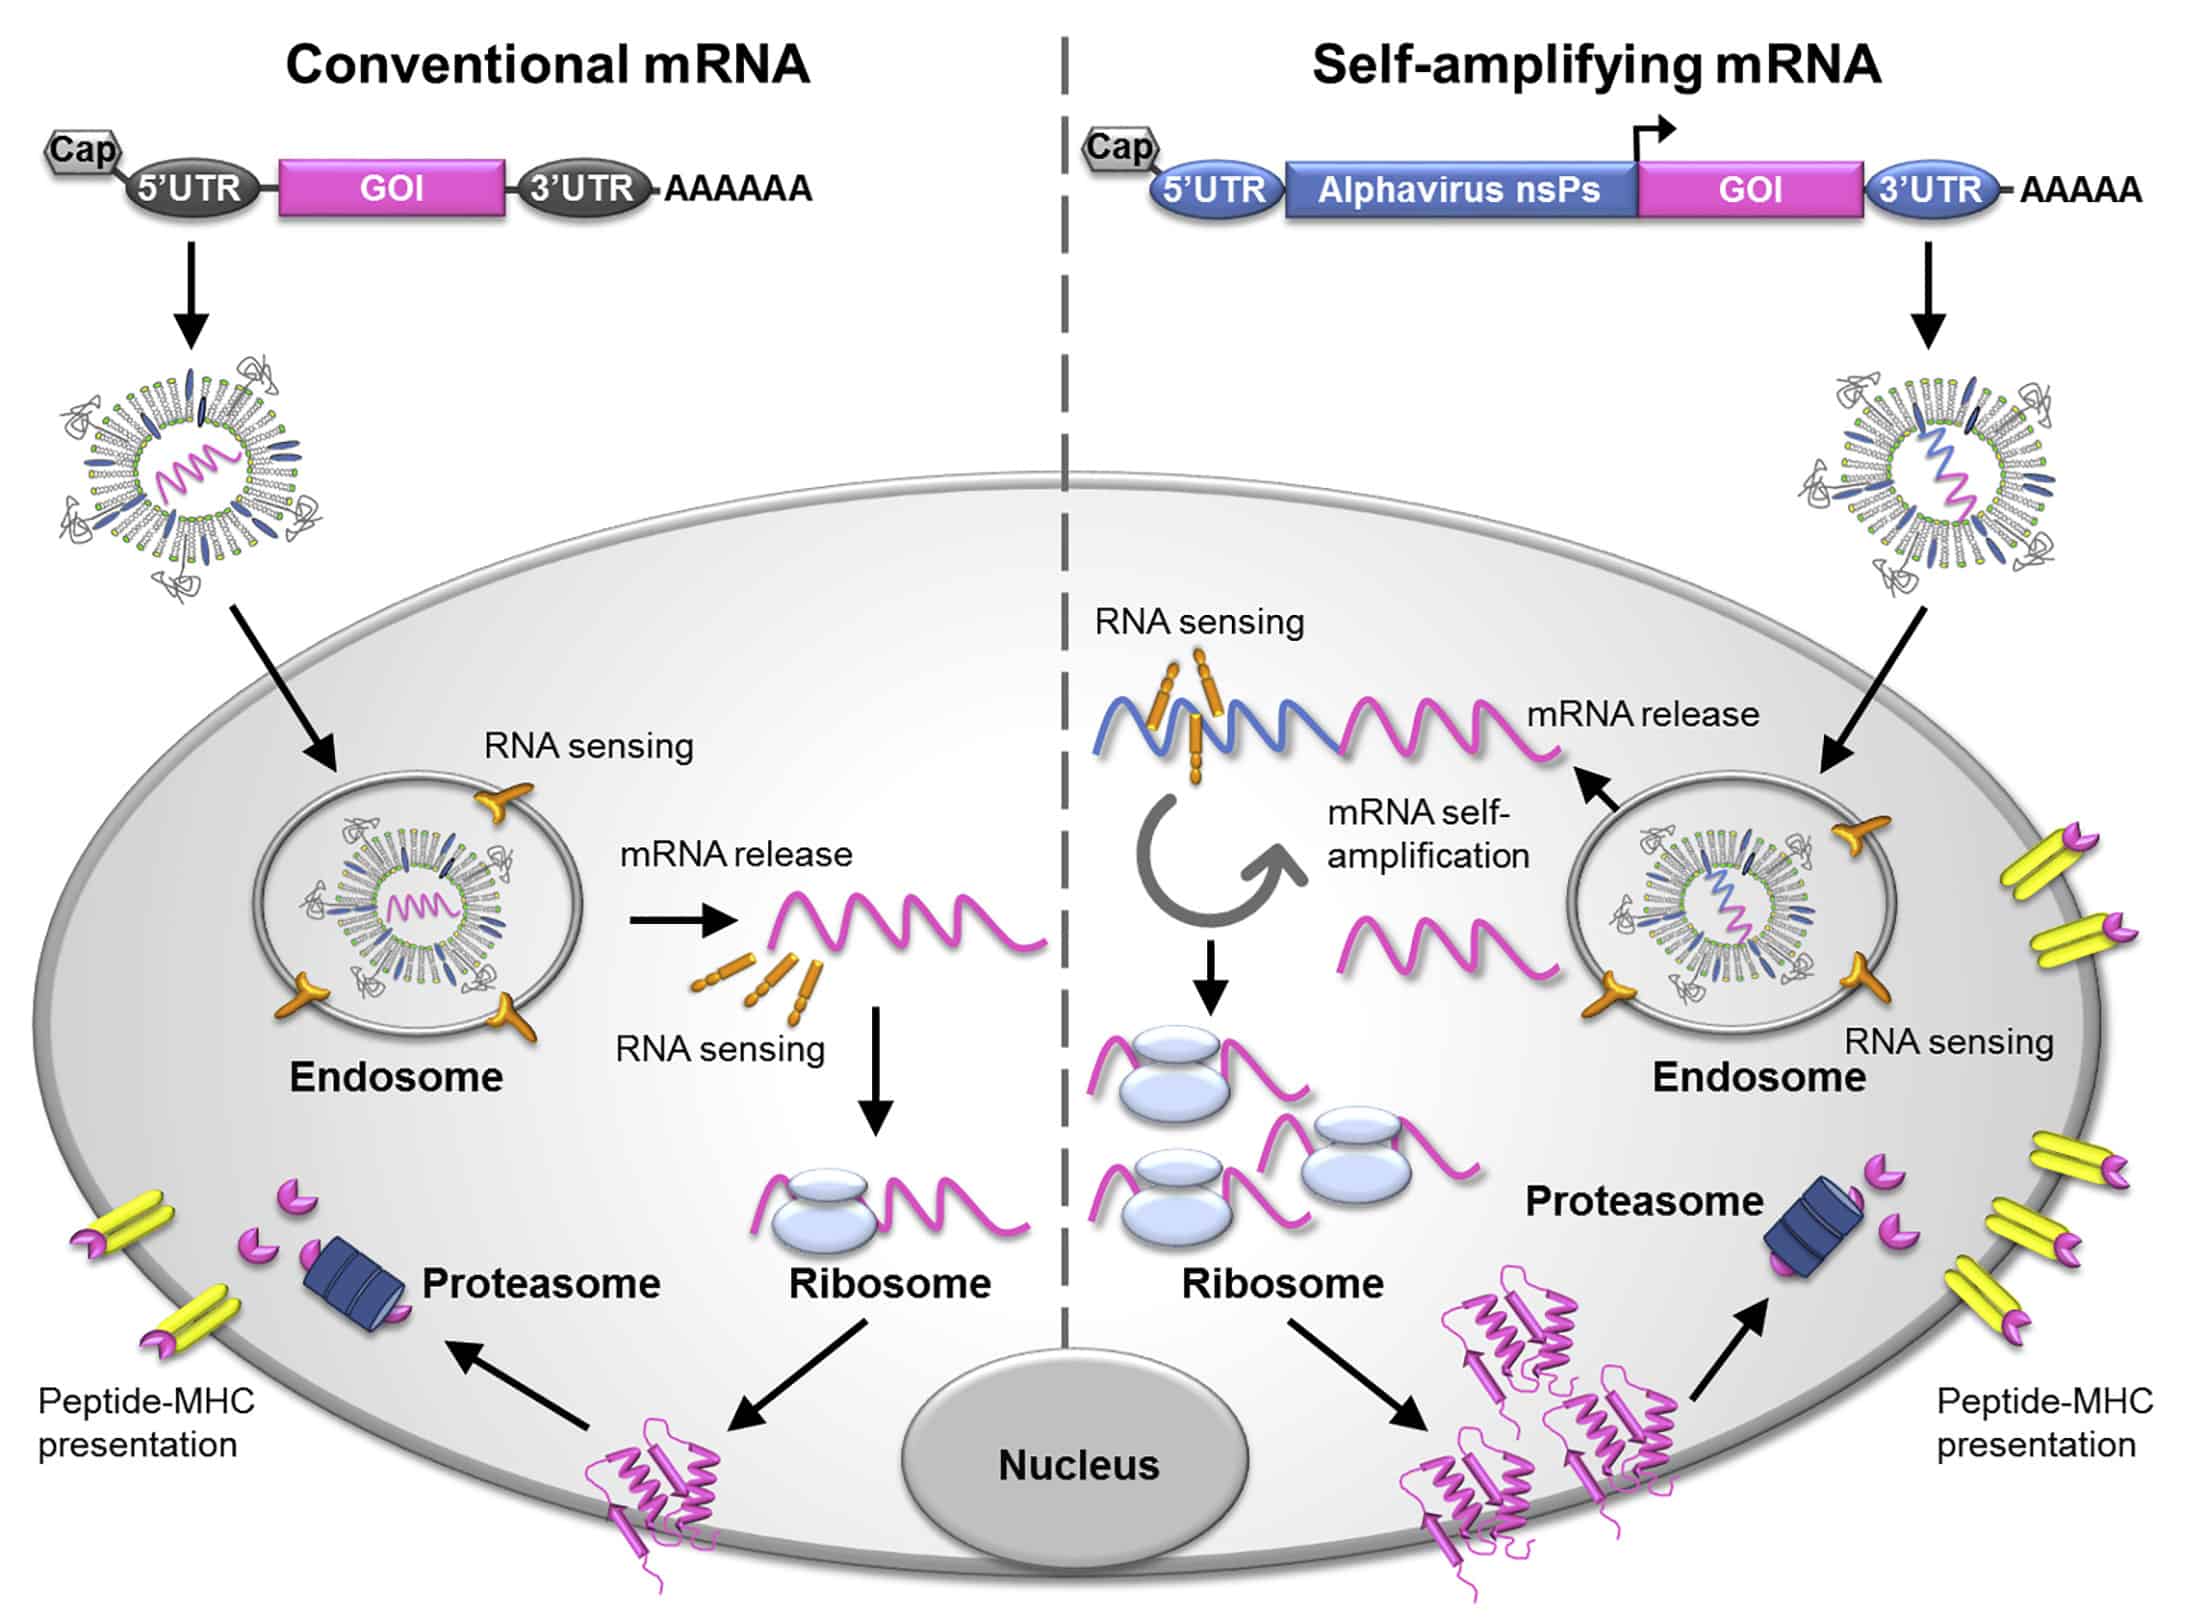 Conventional and Self-replicating mRNA. © 2019 The American Society of Gene and Cell Therapy.